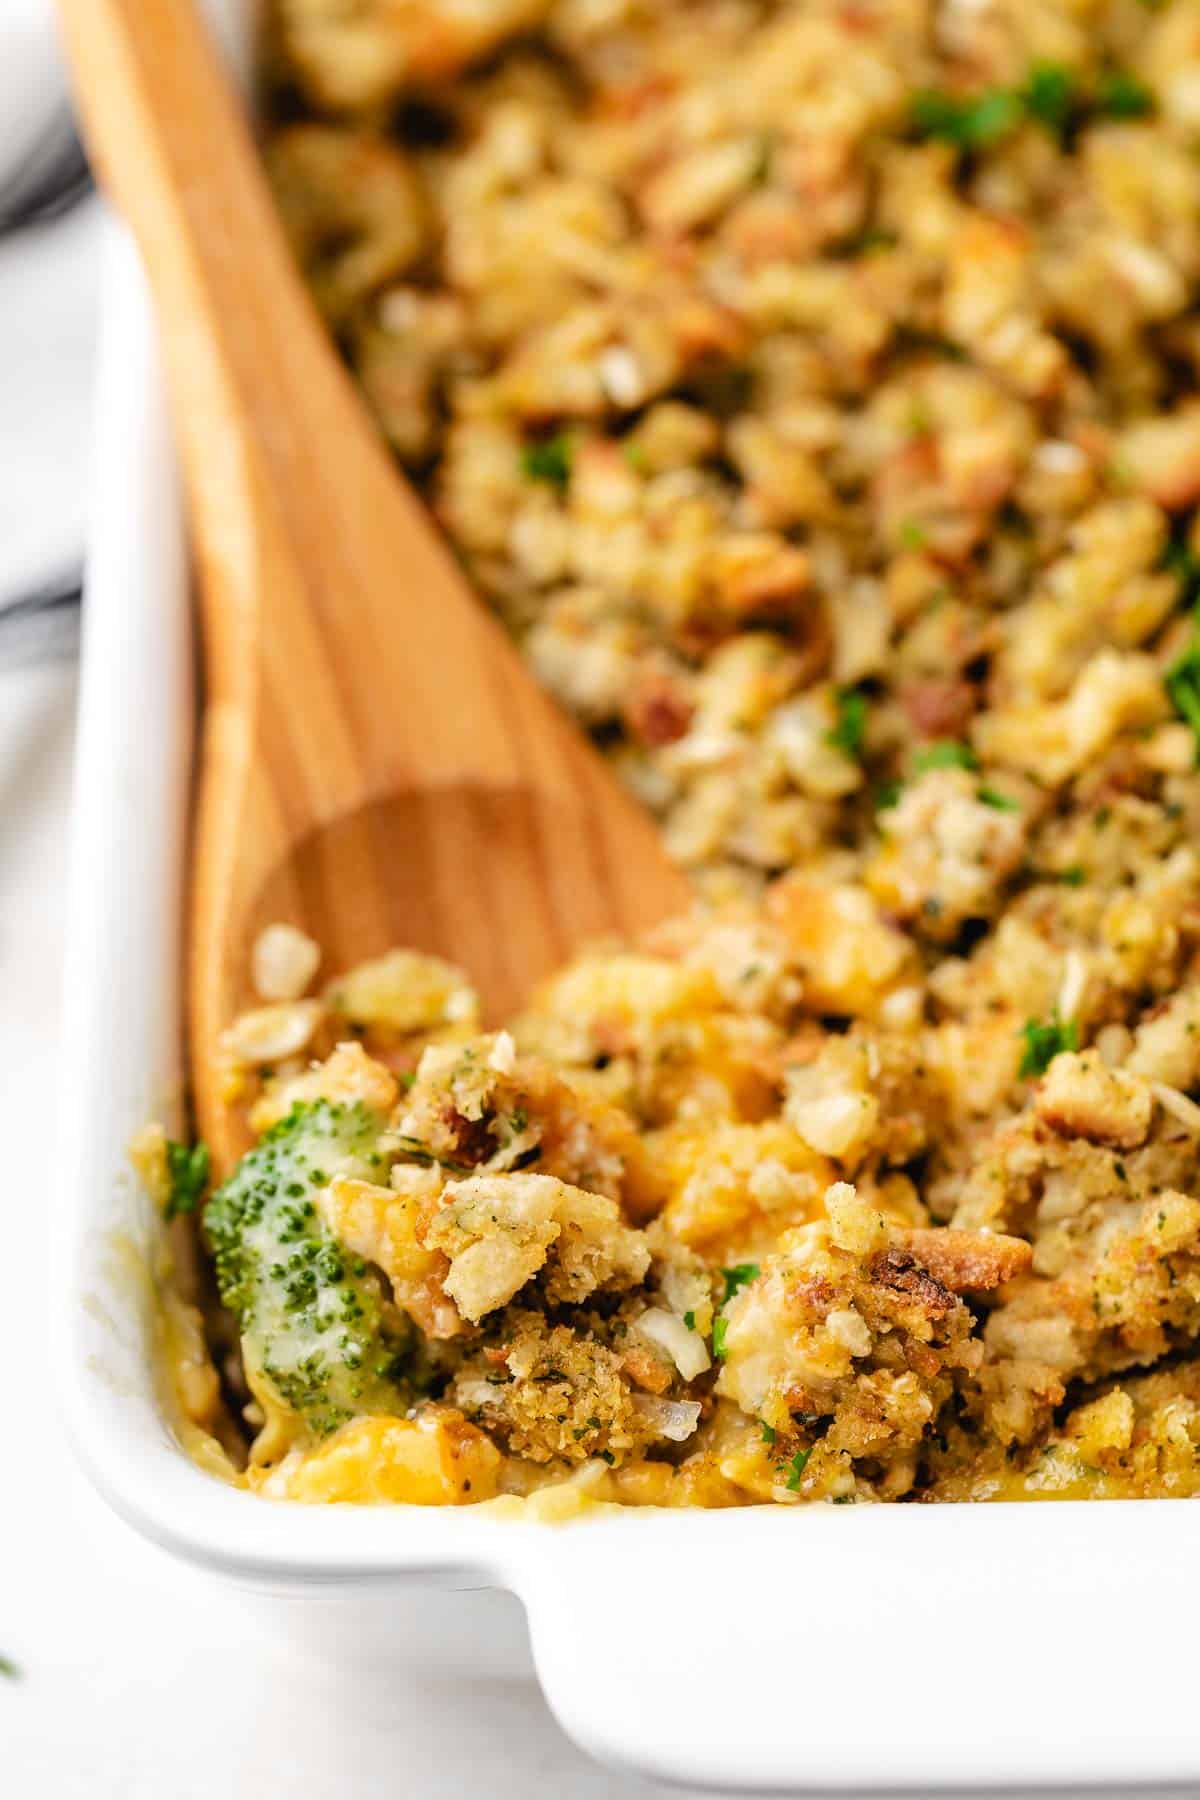 Pan of broccoli and chicken stuffing casserole.